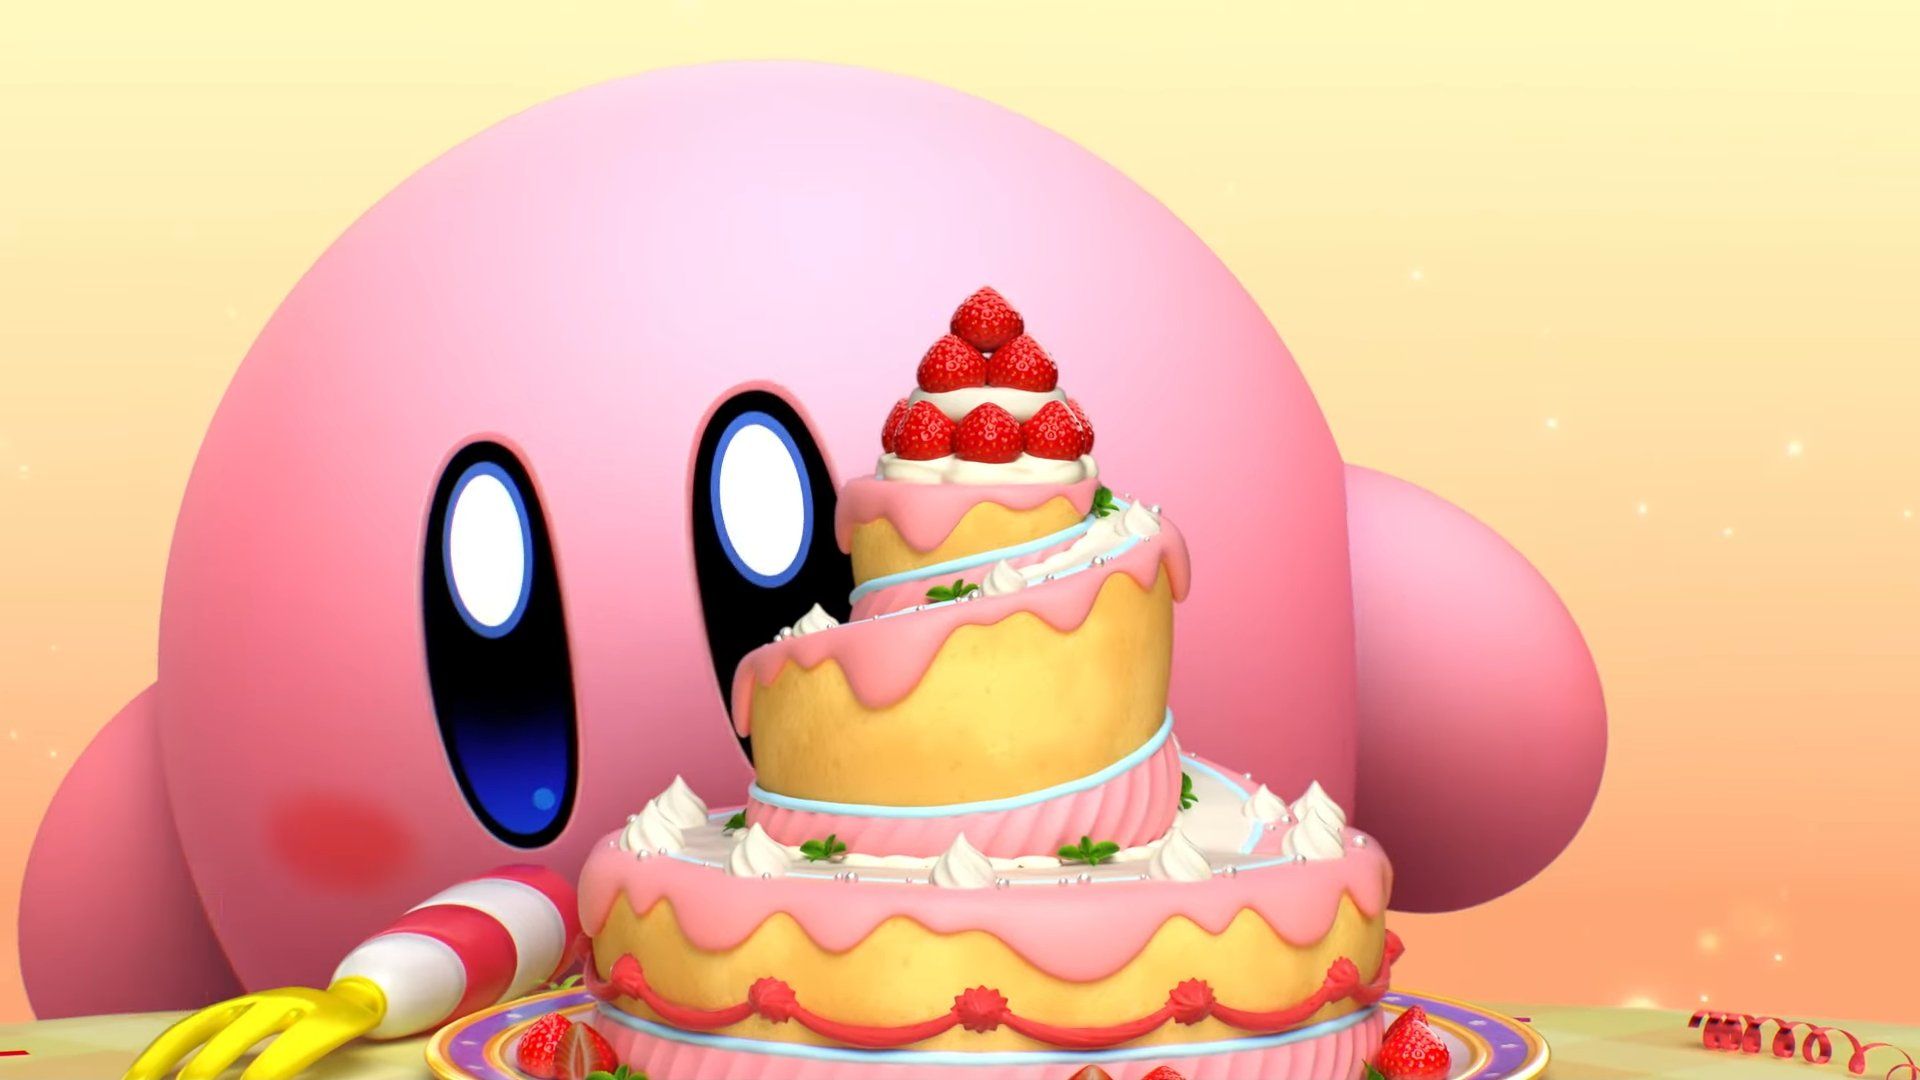 Kirby's Dream Buffet makes mistakes that Nintendo fans have complained about before.